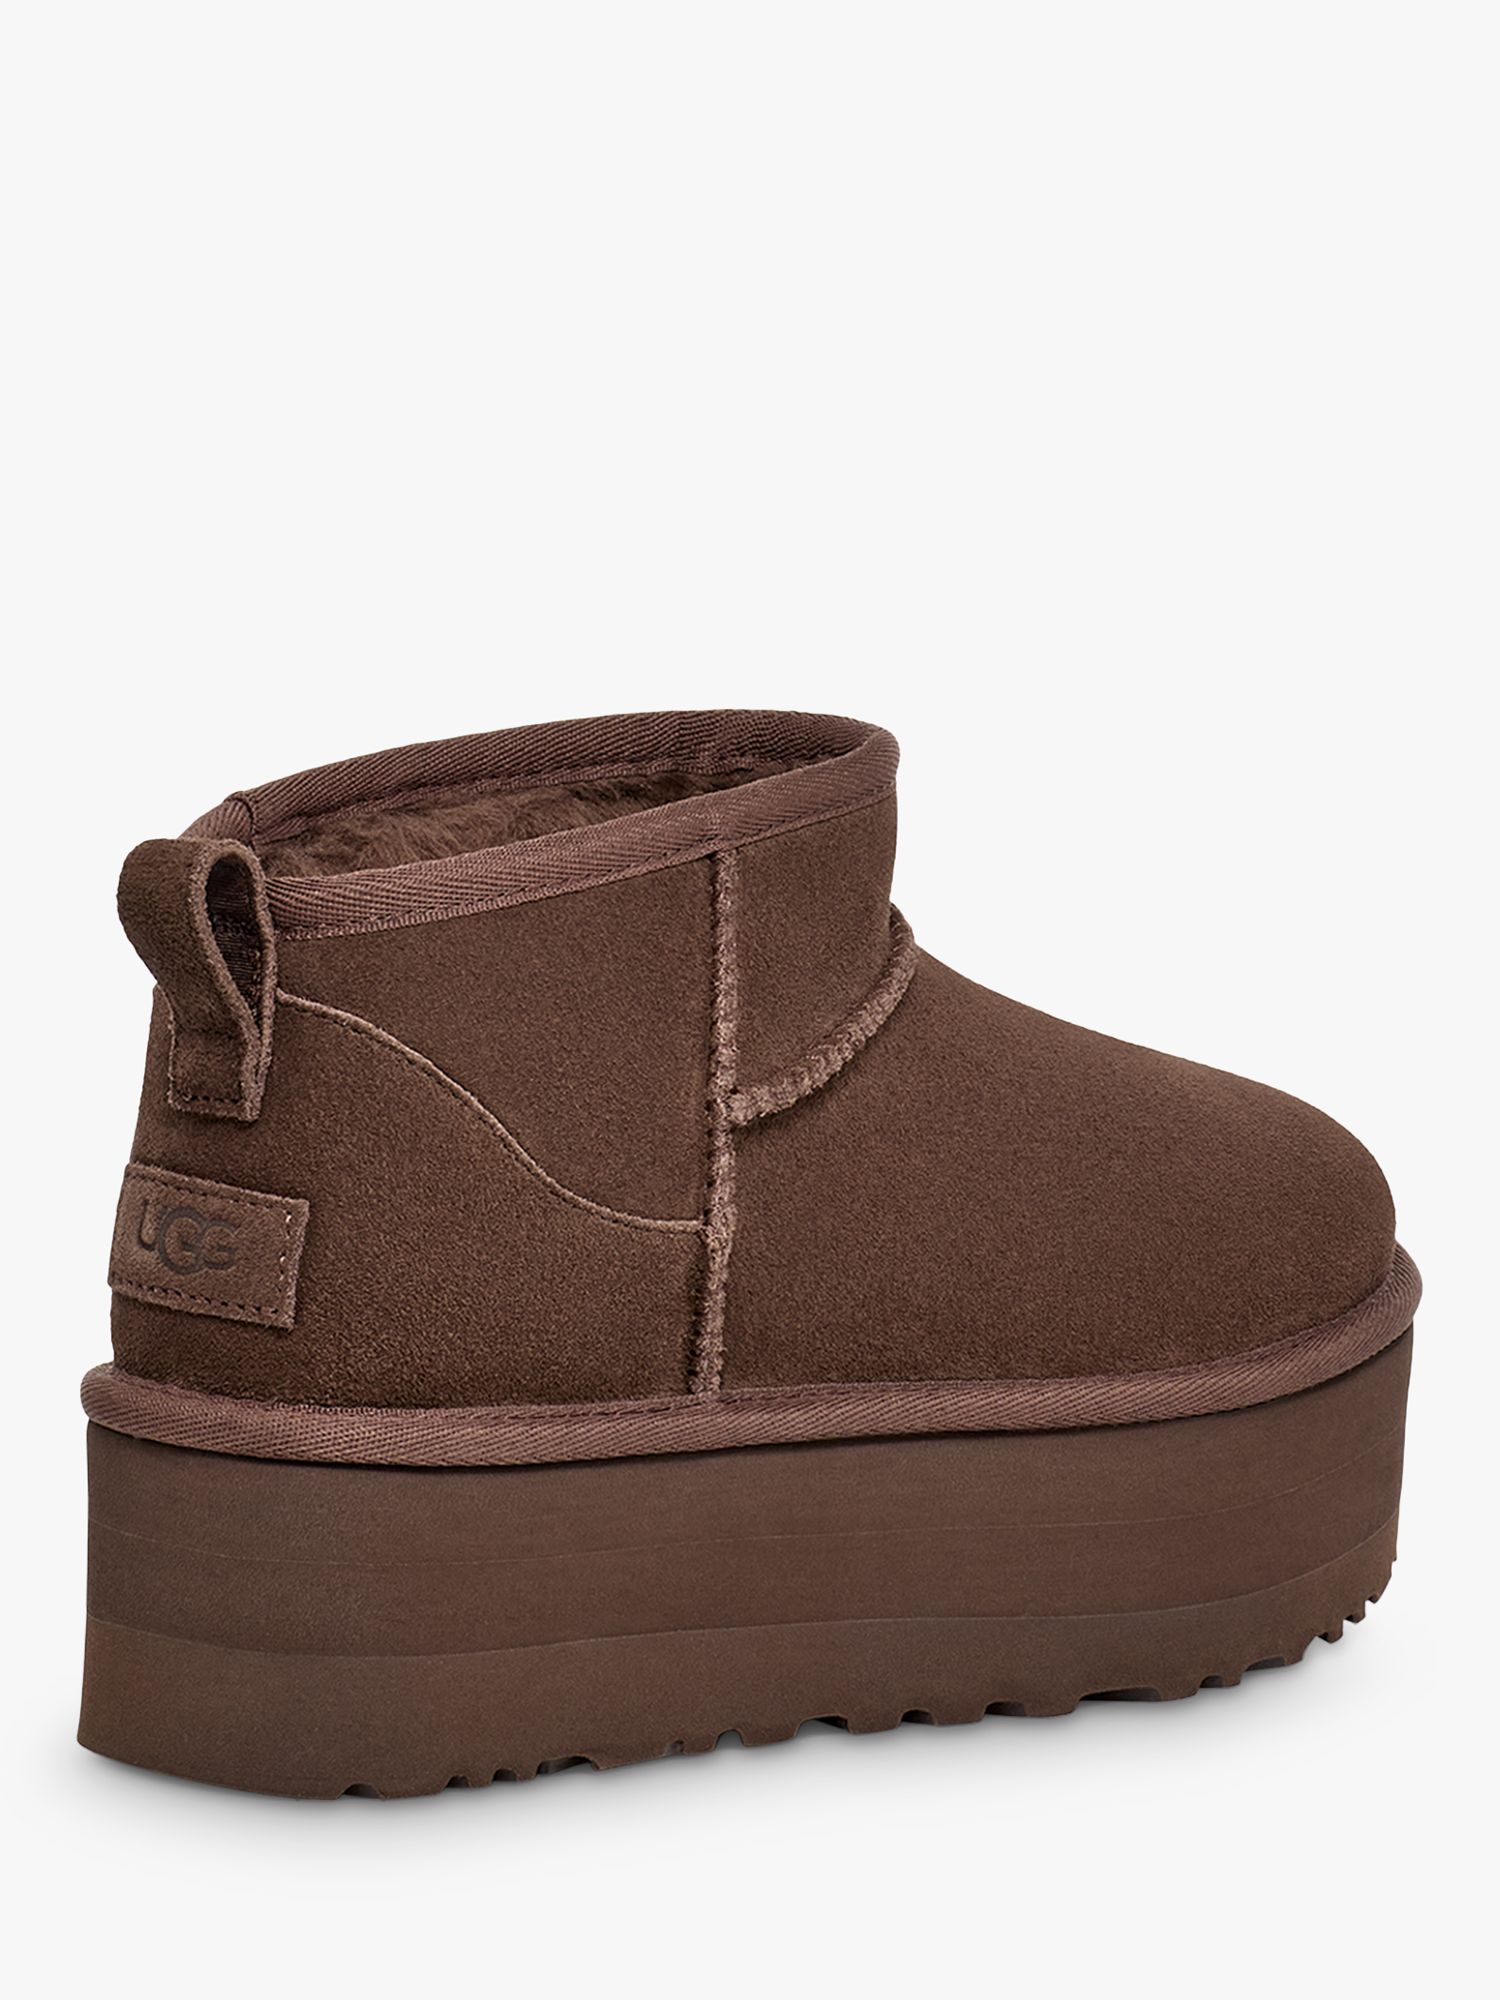 UGG Classic Ultra Mini Platform Suede Boots, Brown Chocolate, 3